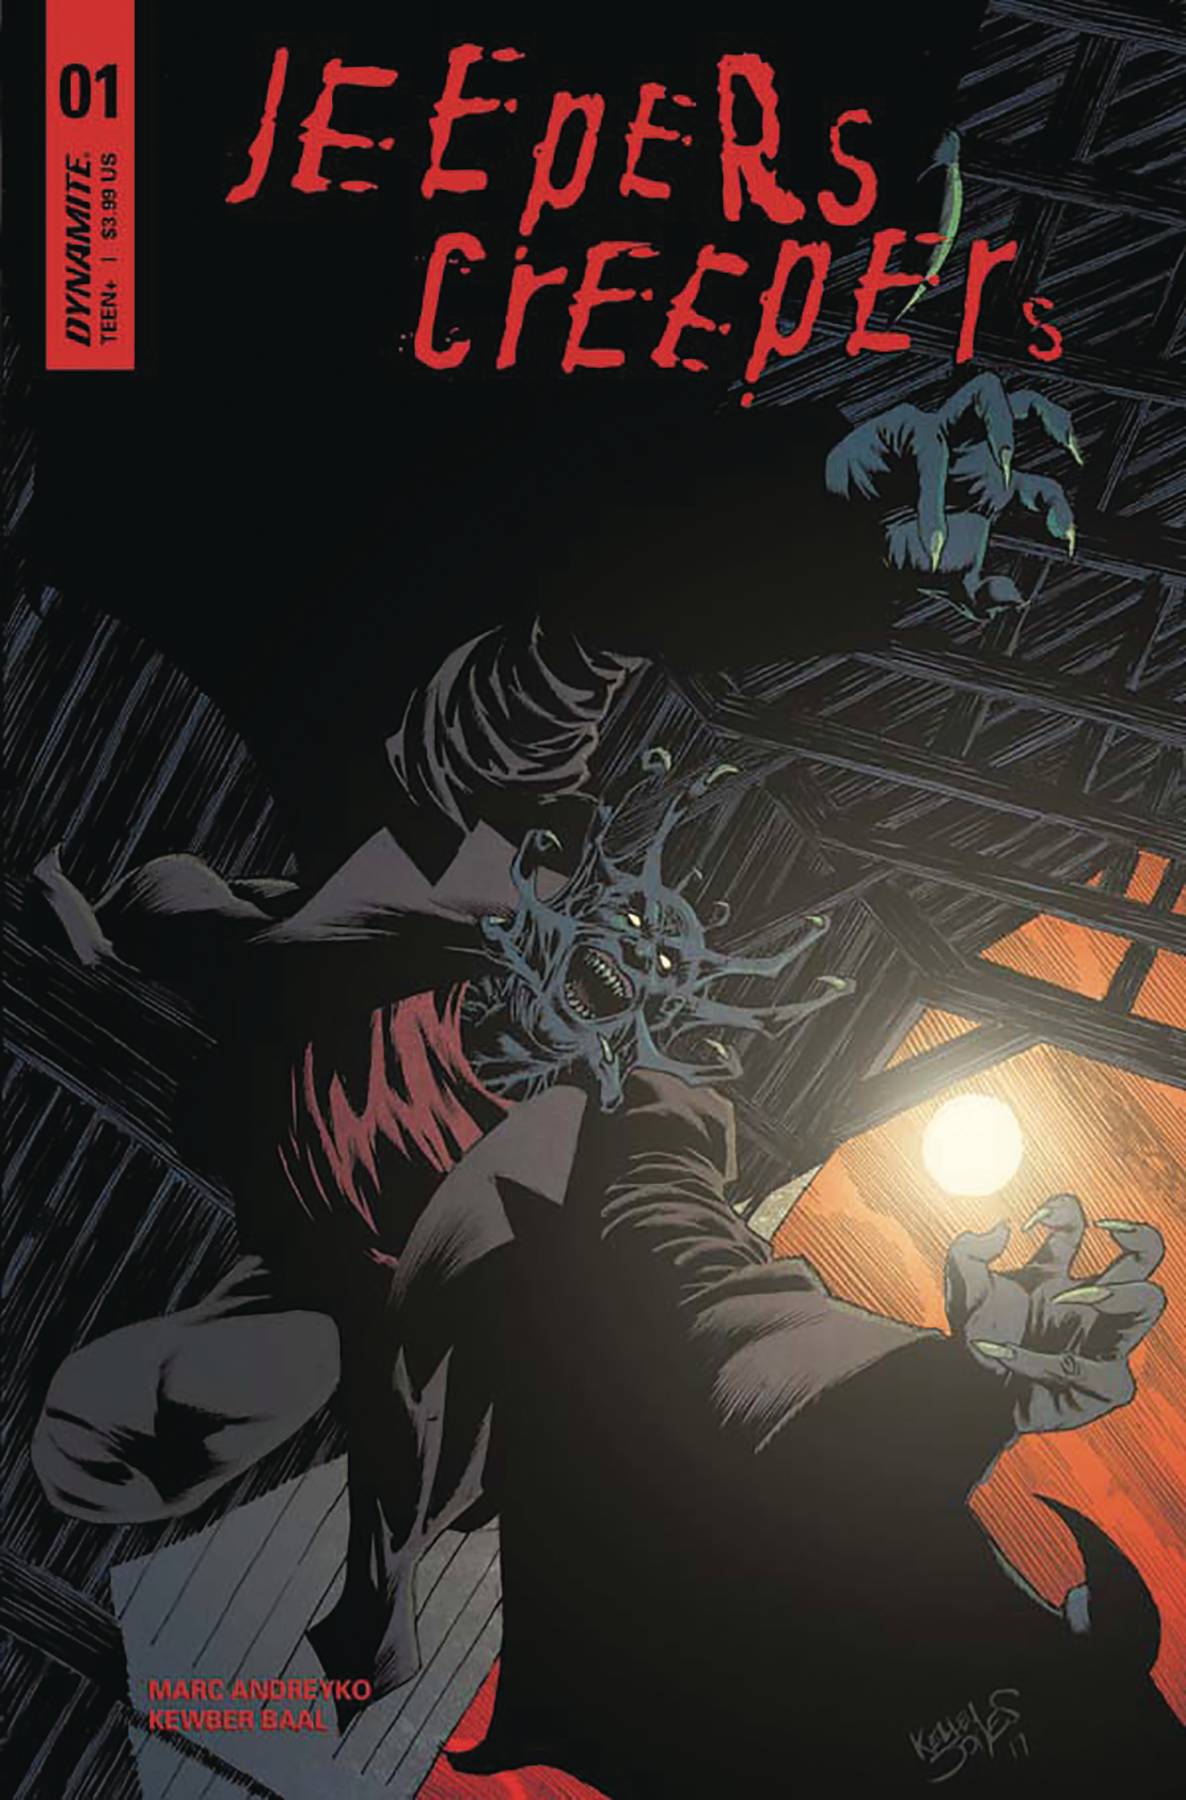 Jeepers Creepers #1 Cover A Jones